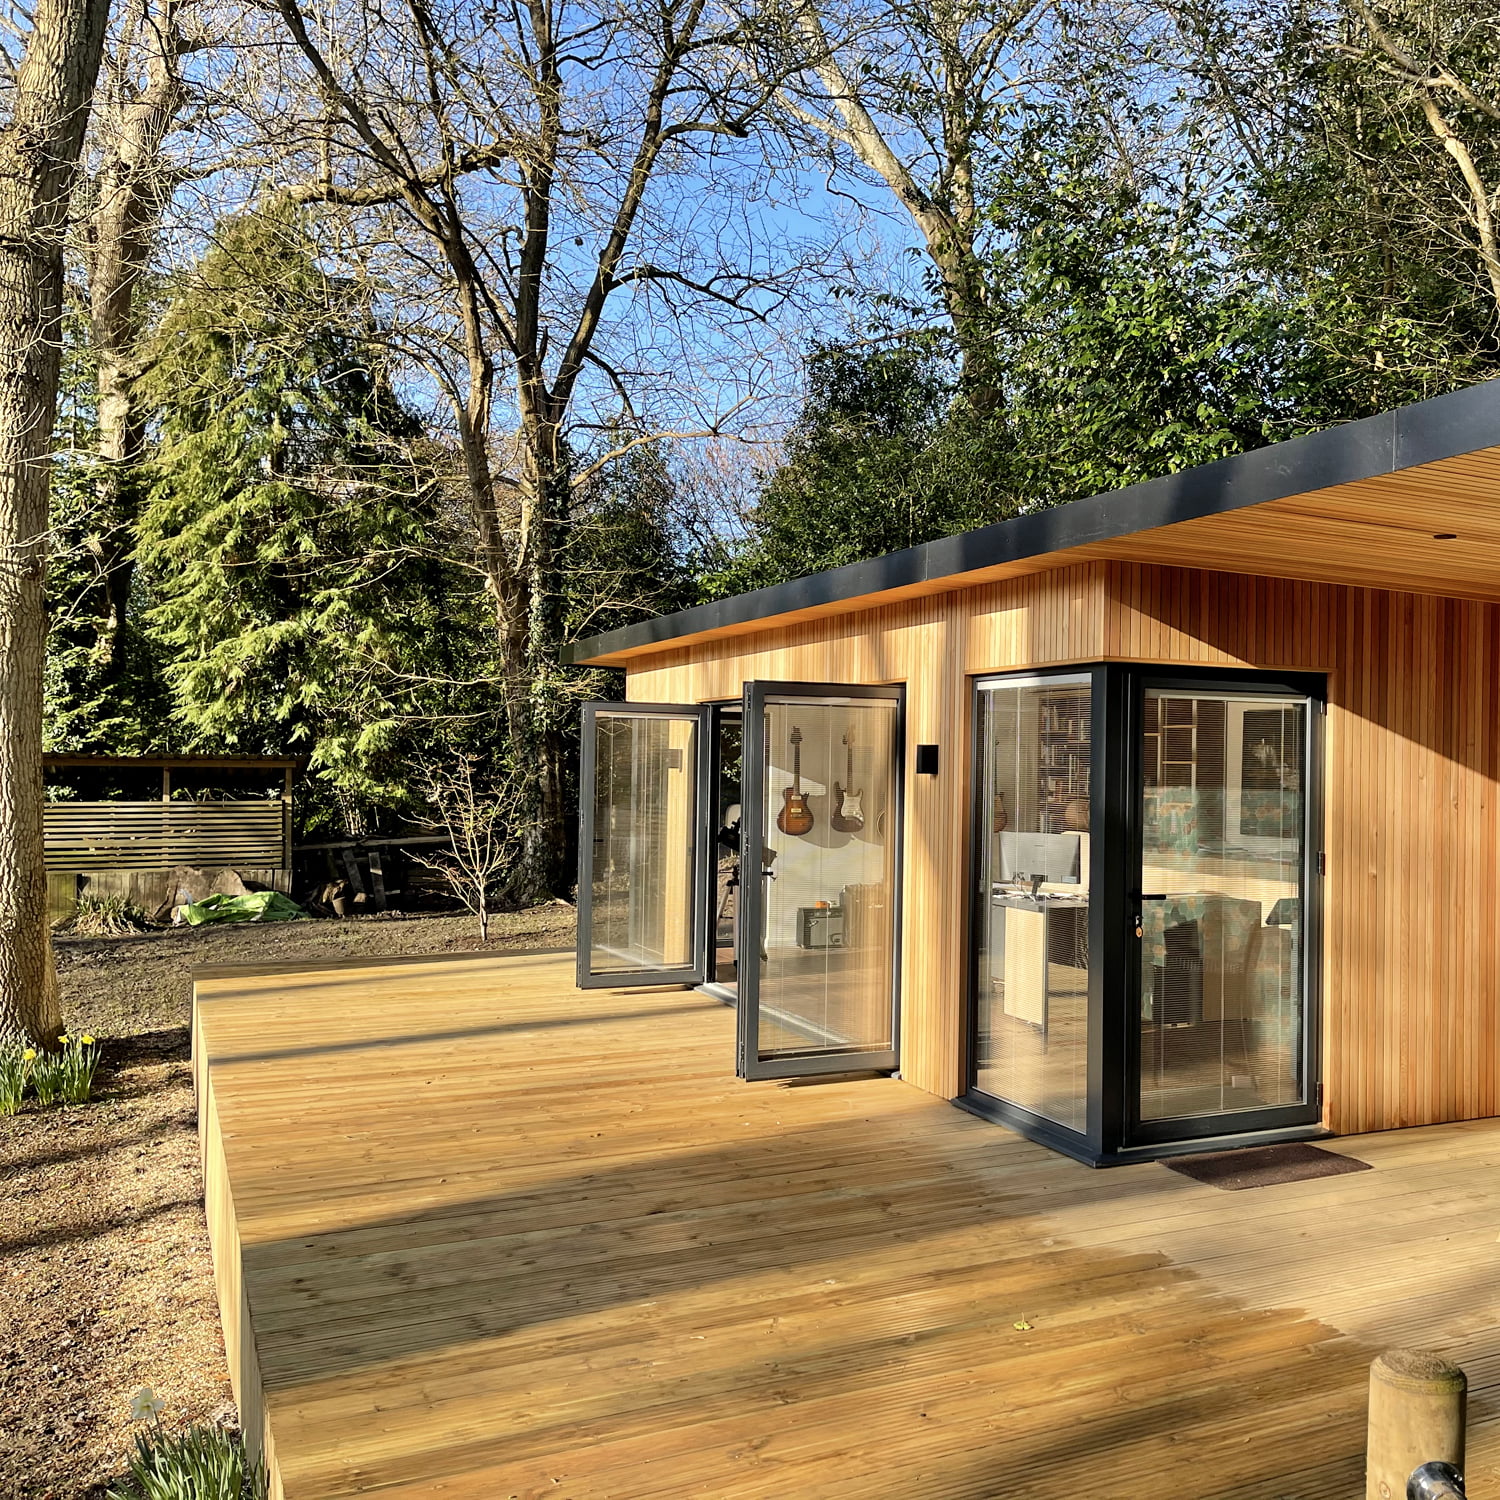 Unique bespoke large garden office with decking